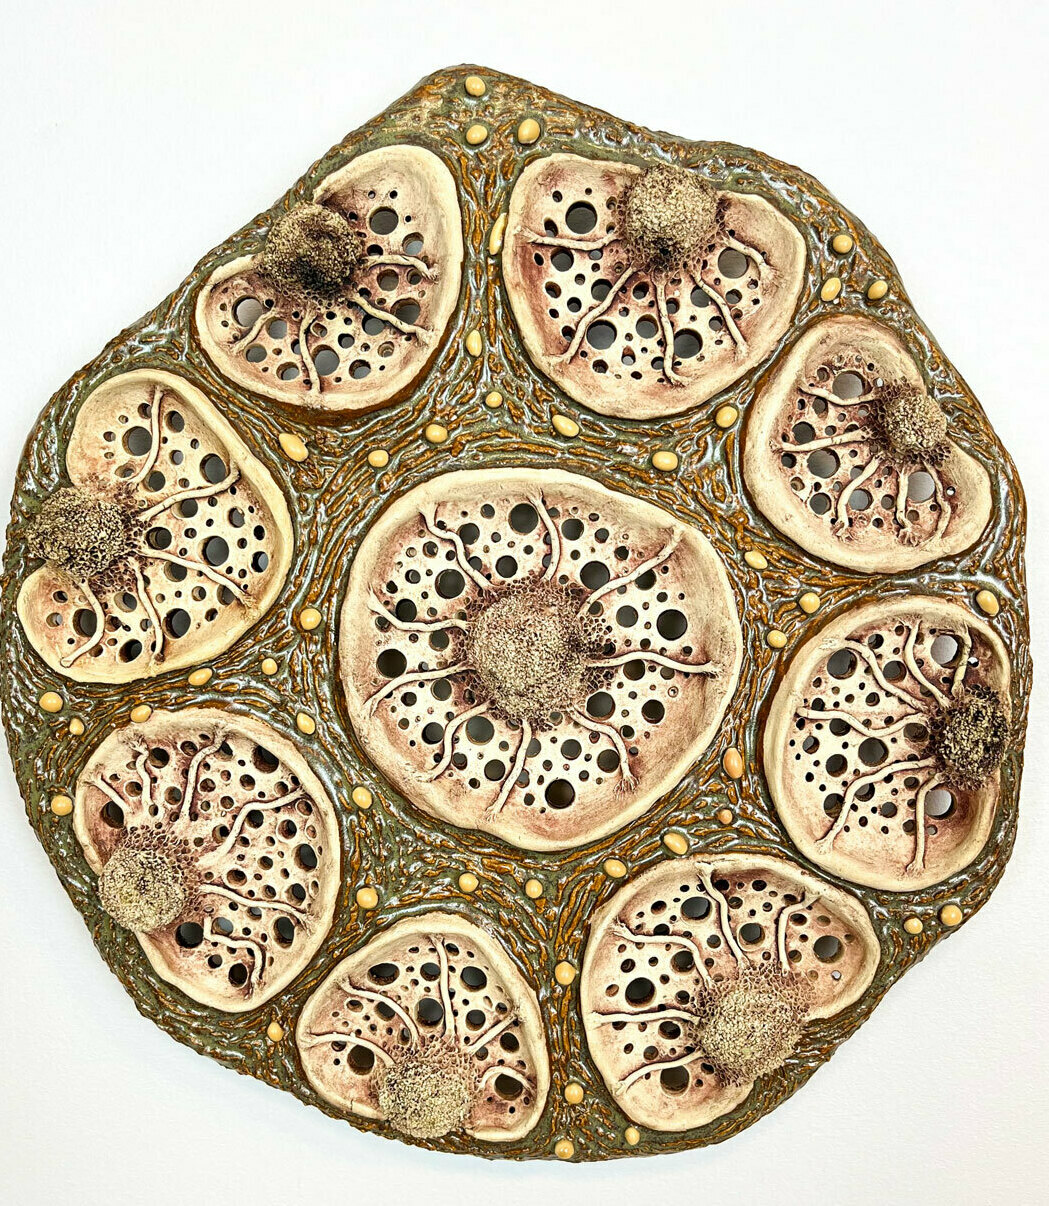 Detailed ceramic wall sculpture depicting the cellular structure of the stem of a Liana flower, as seen through a micrograph, with an emphasis on organic forms, intricate patterns and textures. 